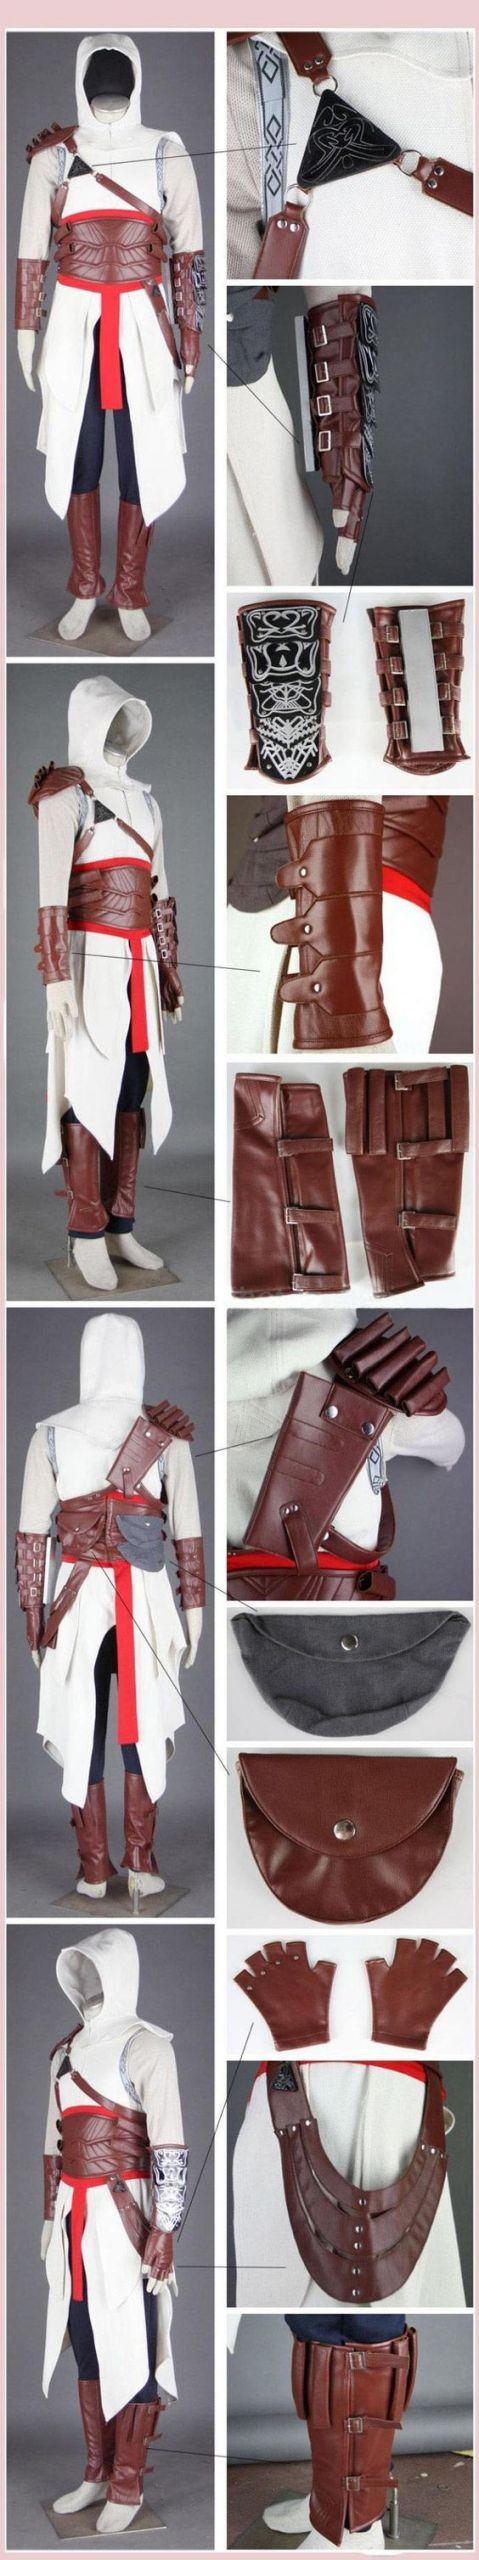 DIY Assassins Creed Costume
 59 best Assassin s Creed DIY images on Pinterest